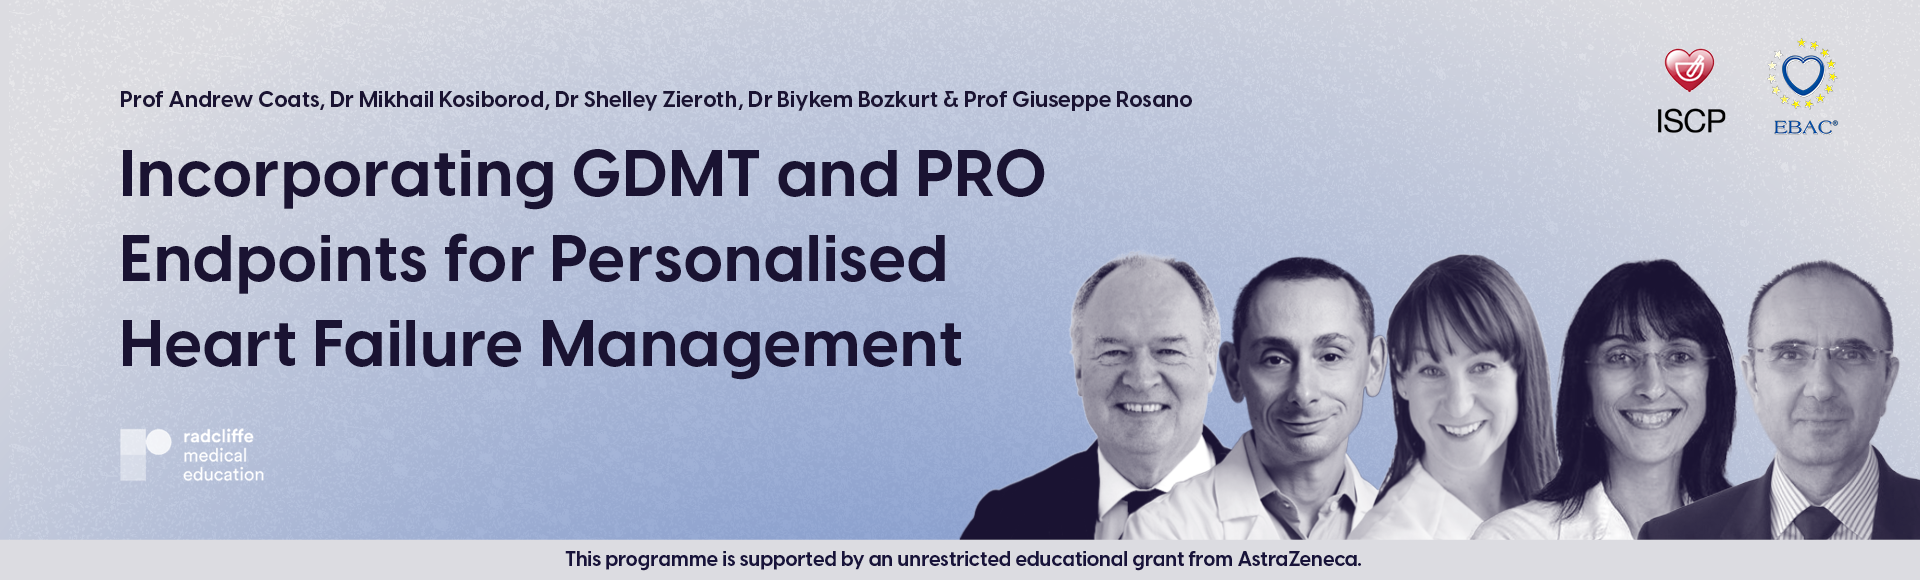 Incorporating GDMT and PRO Endpoints for Personalised HF Management